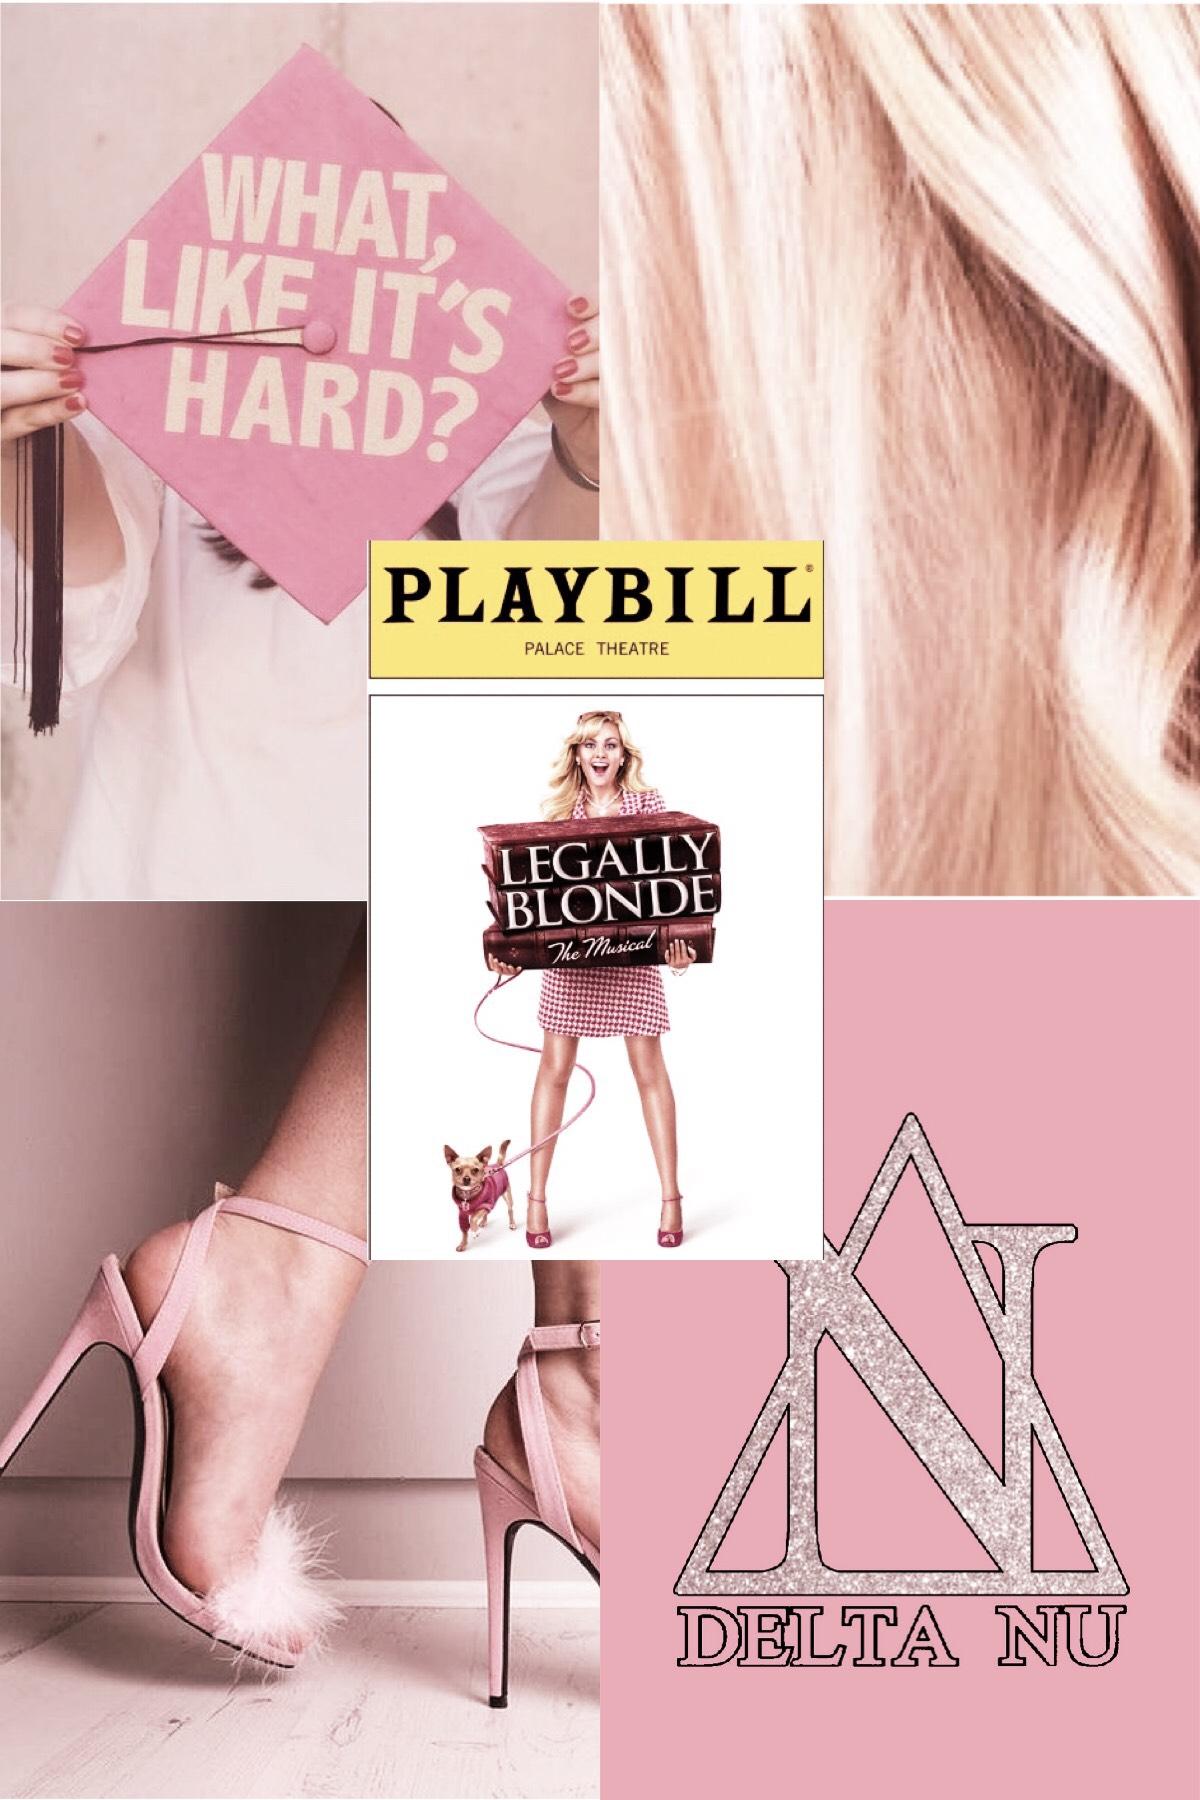 What, like it’s hard?
-
Here’s some Legally Blonde for y’all! Again the musical is amazing so if you haven’t heard it, you 100% should listen to it!